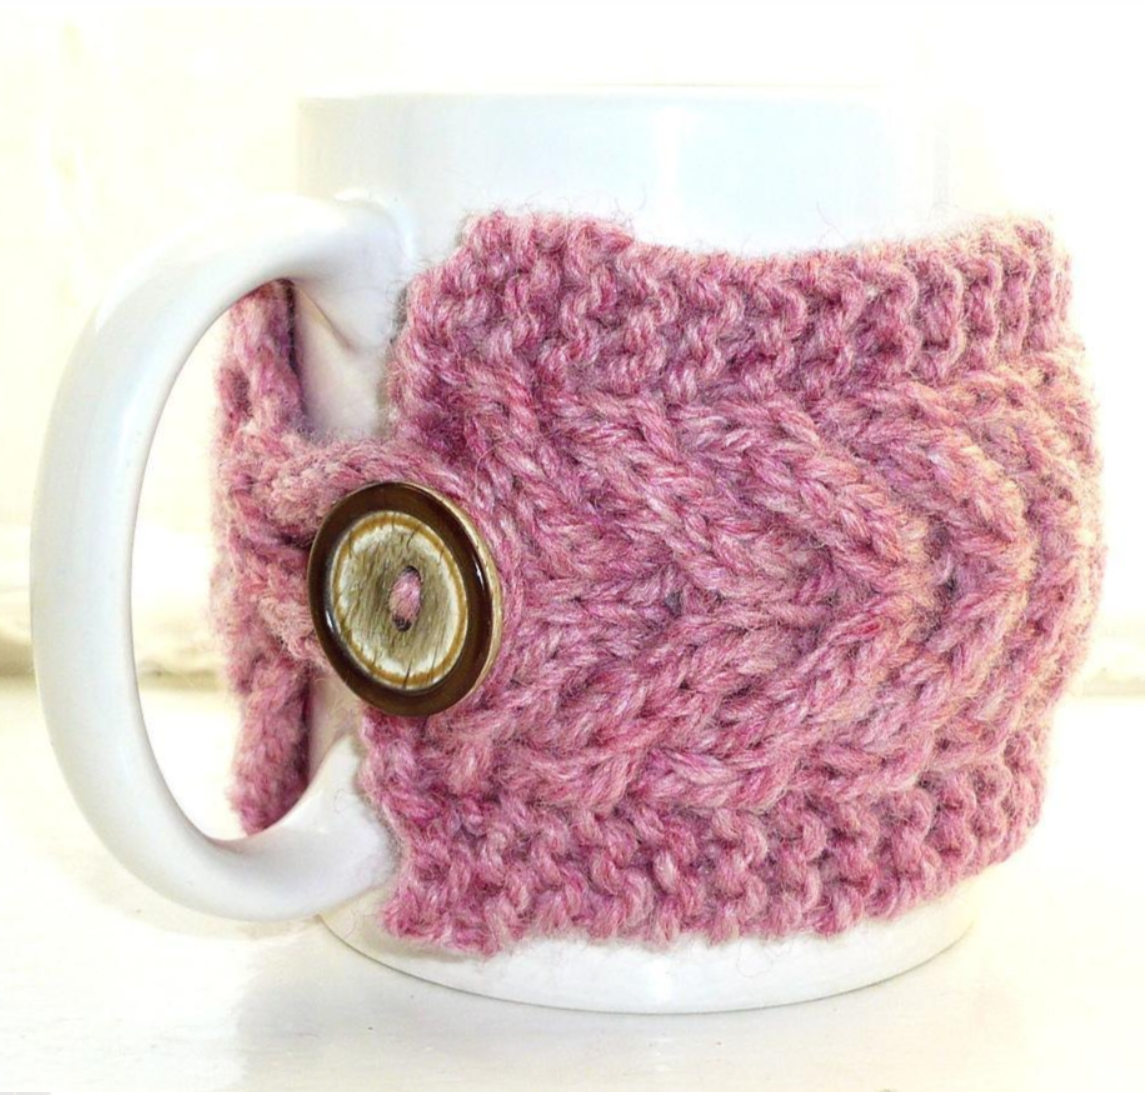 33 Cup Cosy - Free knitting pattern